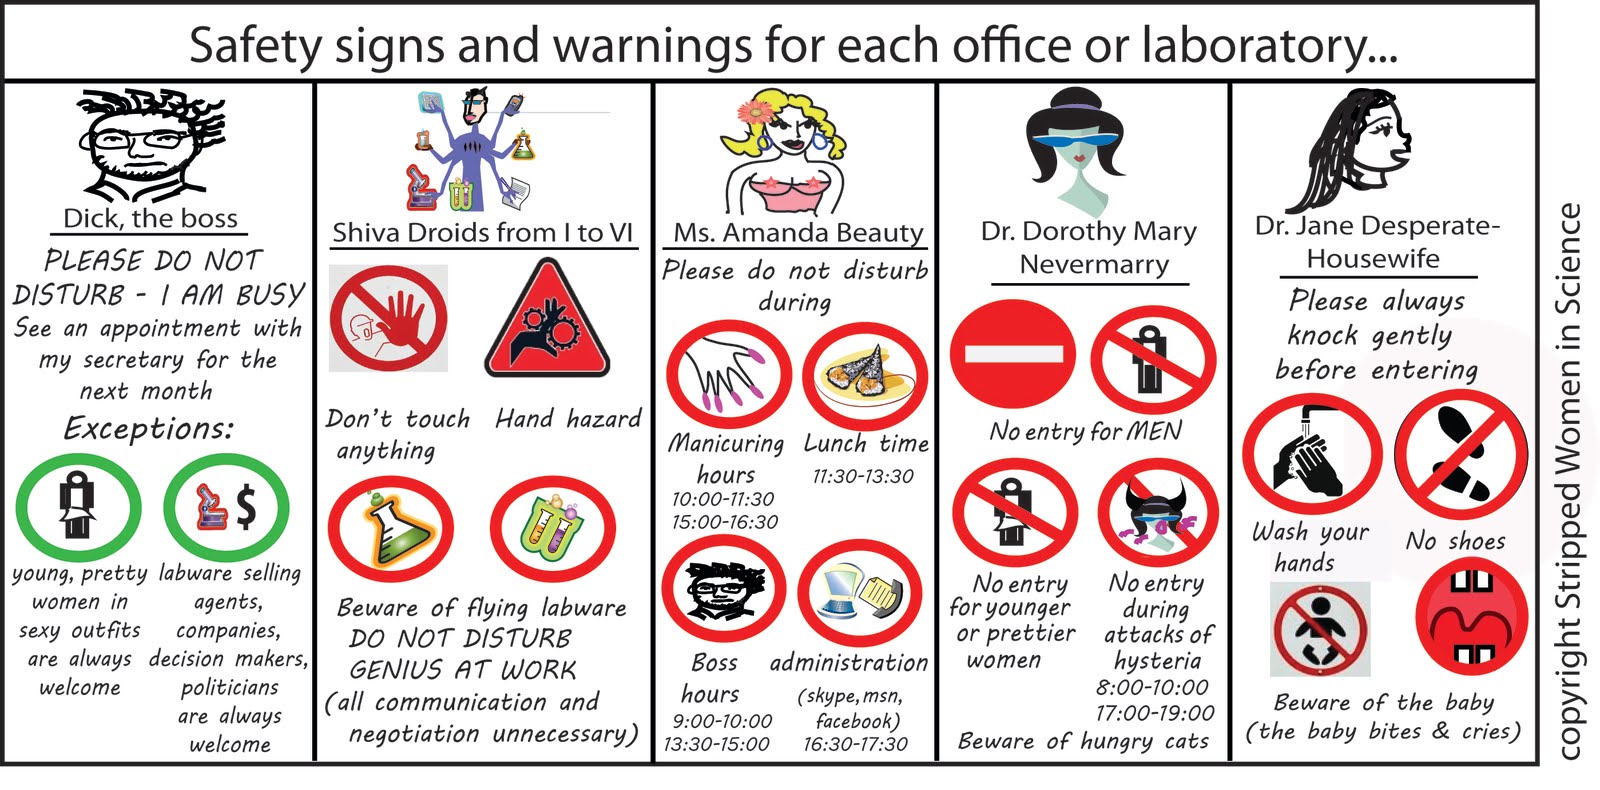 Stripped Women in Science: Safety signs for the different labs and